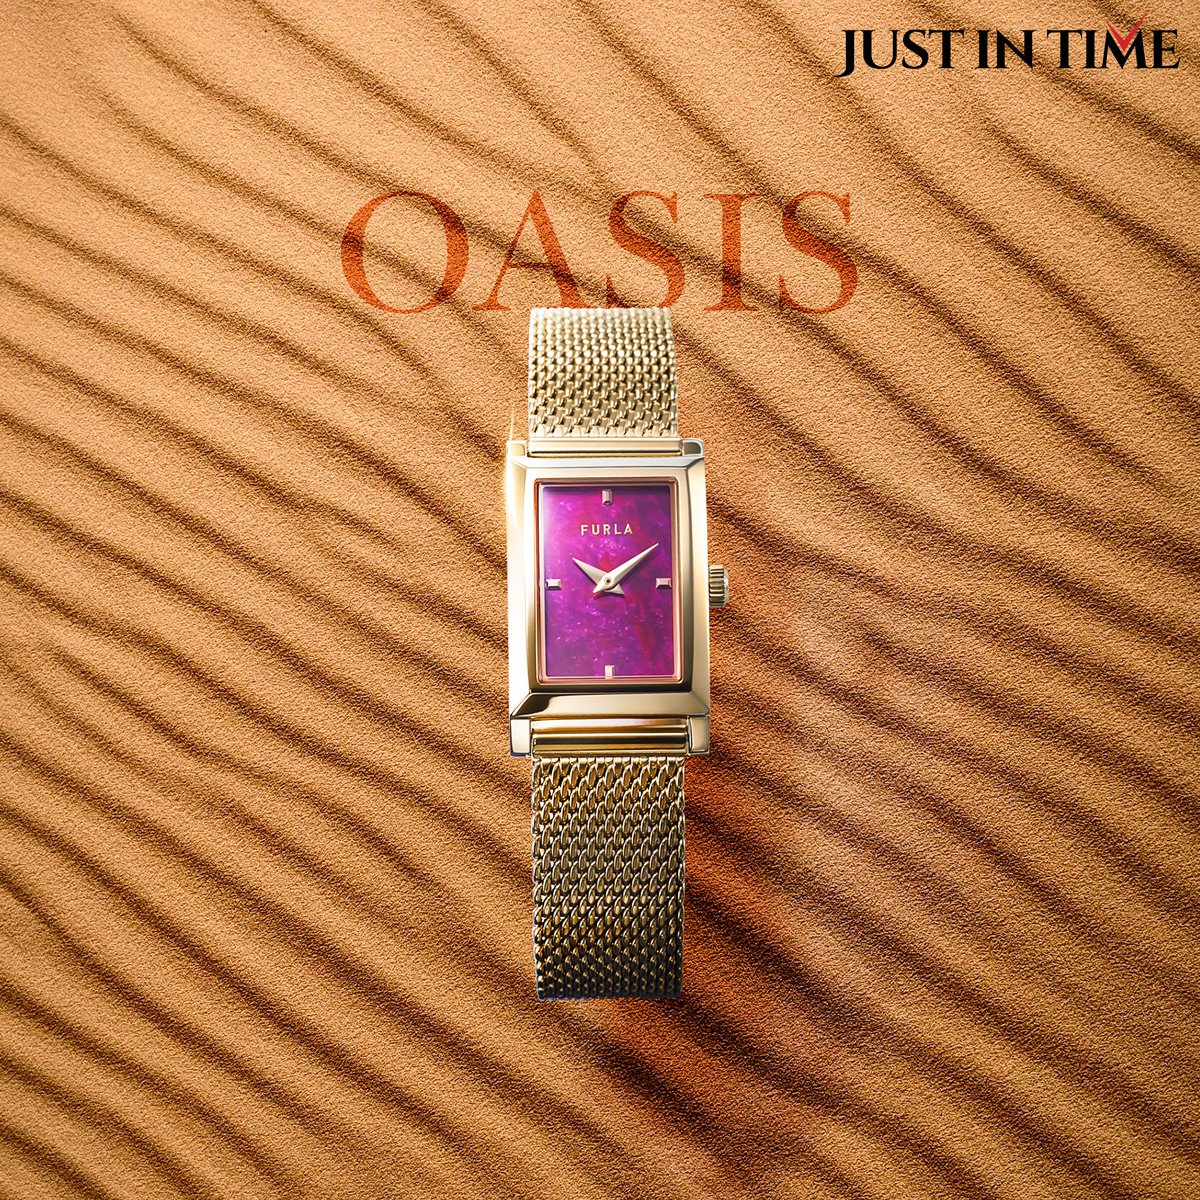 A piece of beauty in the middle of the desert 🌵

Watch displayed: Furla Watch WW00034001L3
.
.
.
#JustInTime #JustInTimeWatches #Furla #FurlaWatches #WristWatch #WatchesForWomen #WatchCollector #LuxuryWatches #WatchAddict #WatchLover #WatchStore #WomensFashion #WatchFam